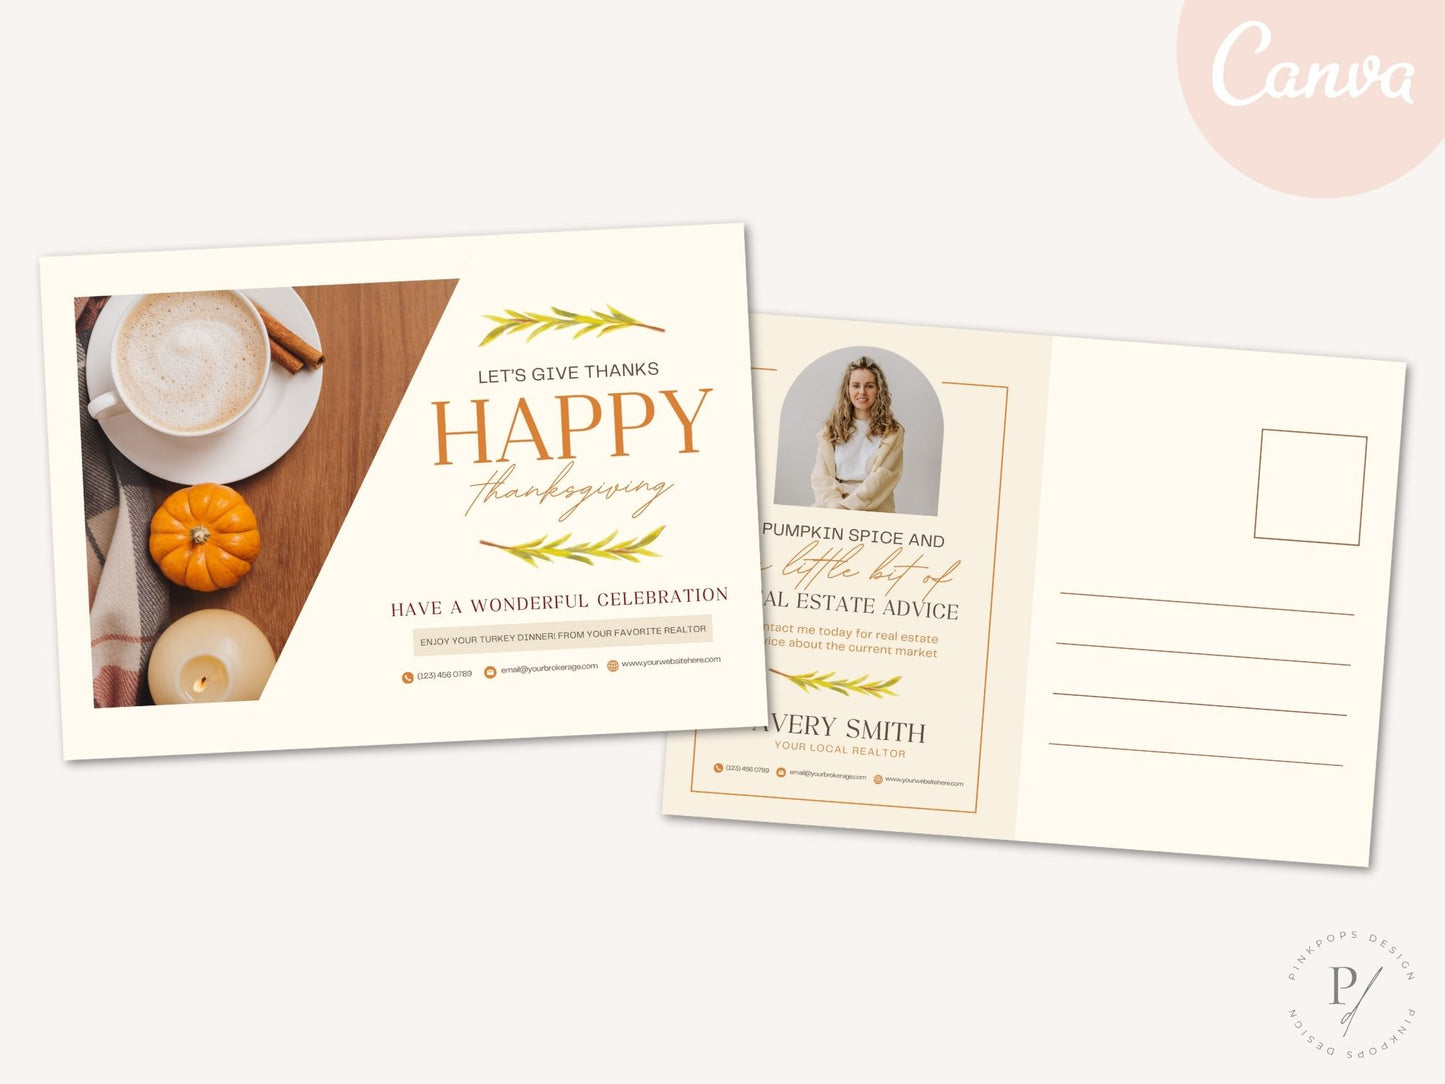 Real Estate Thanksgiving Postcard Vol 01 - Beautifully crafted postcard for expressing gratitude and conveying warm wishes during the Thanksgiving holiday season